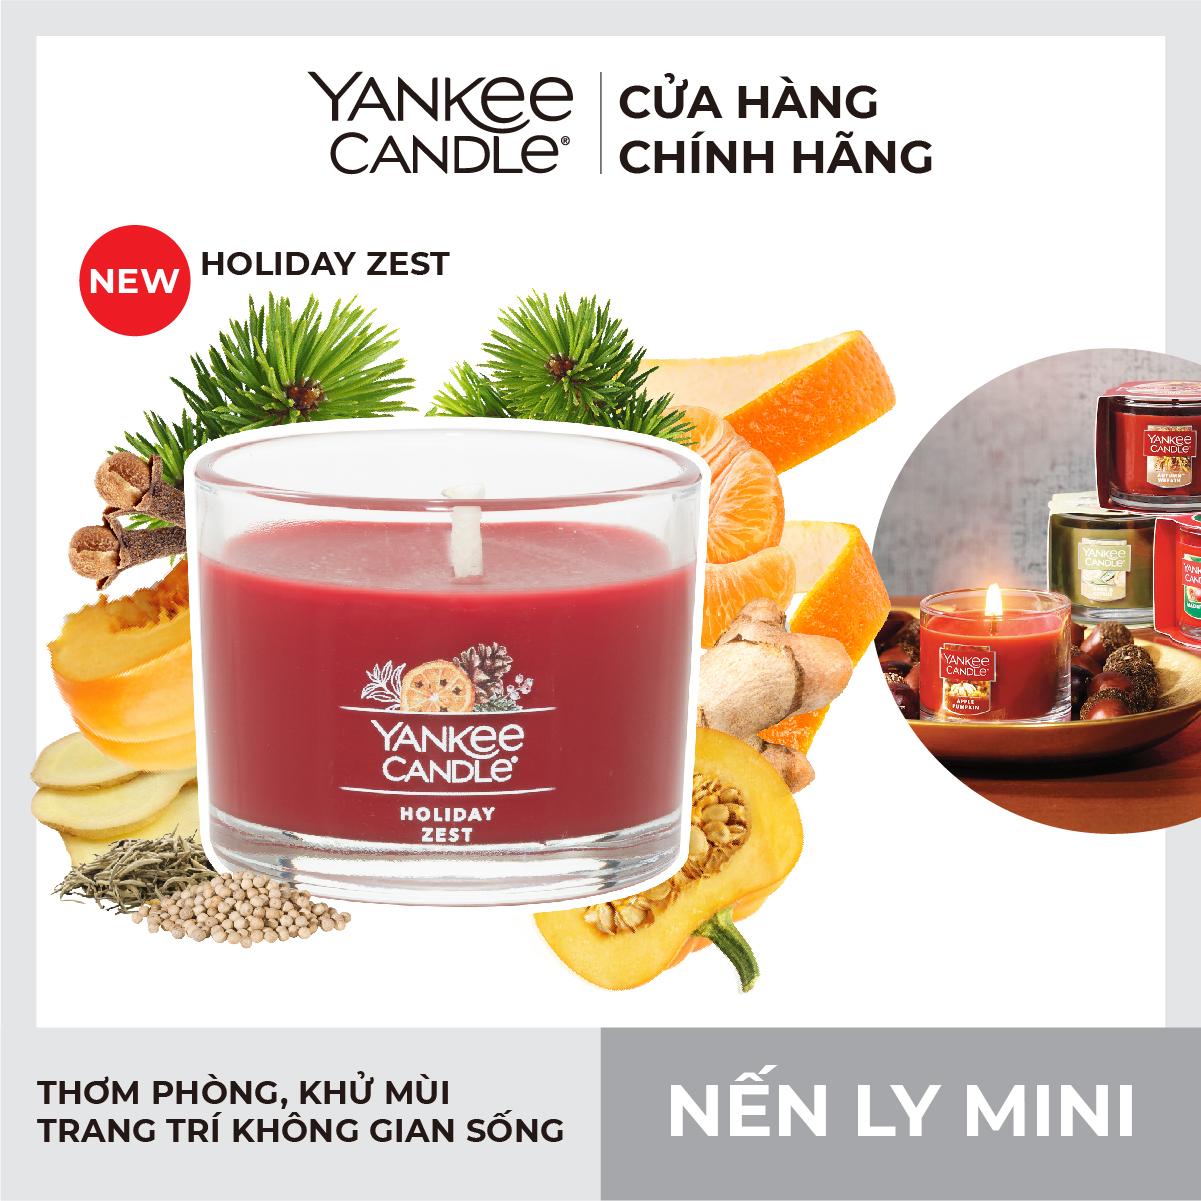 Nến ly mini Yankee Candle (37g) - Holiday Zest